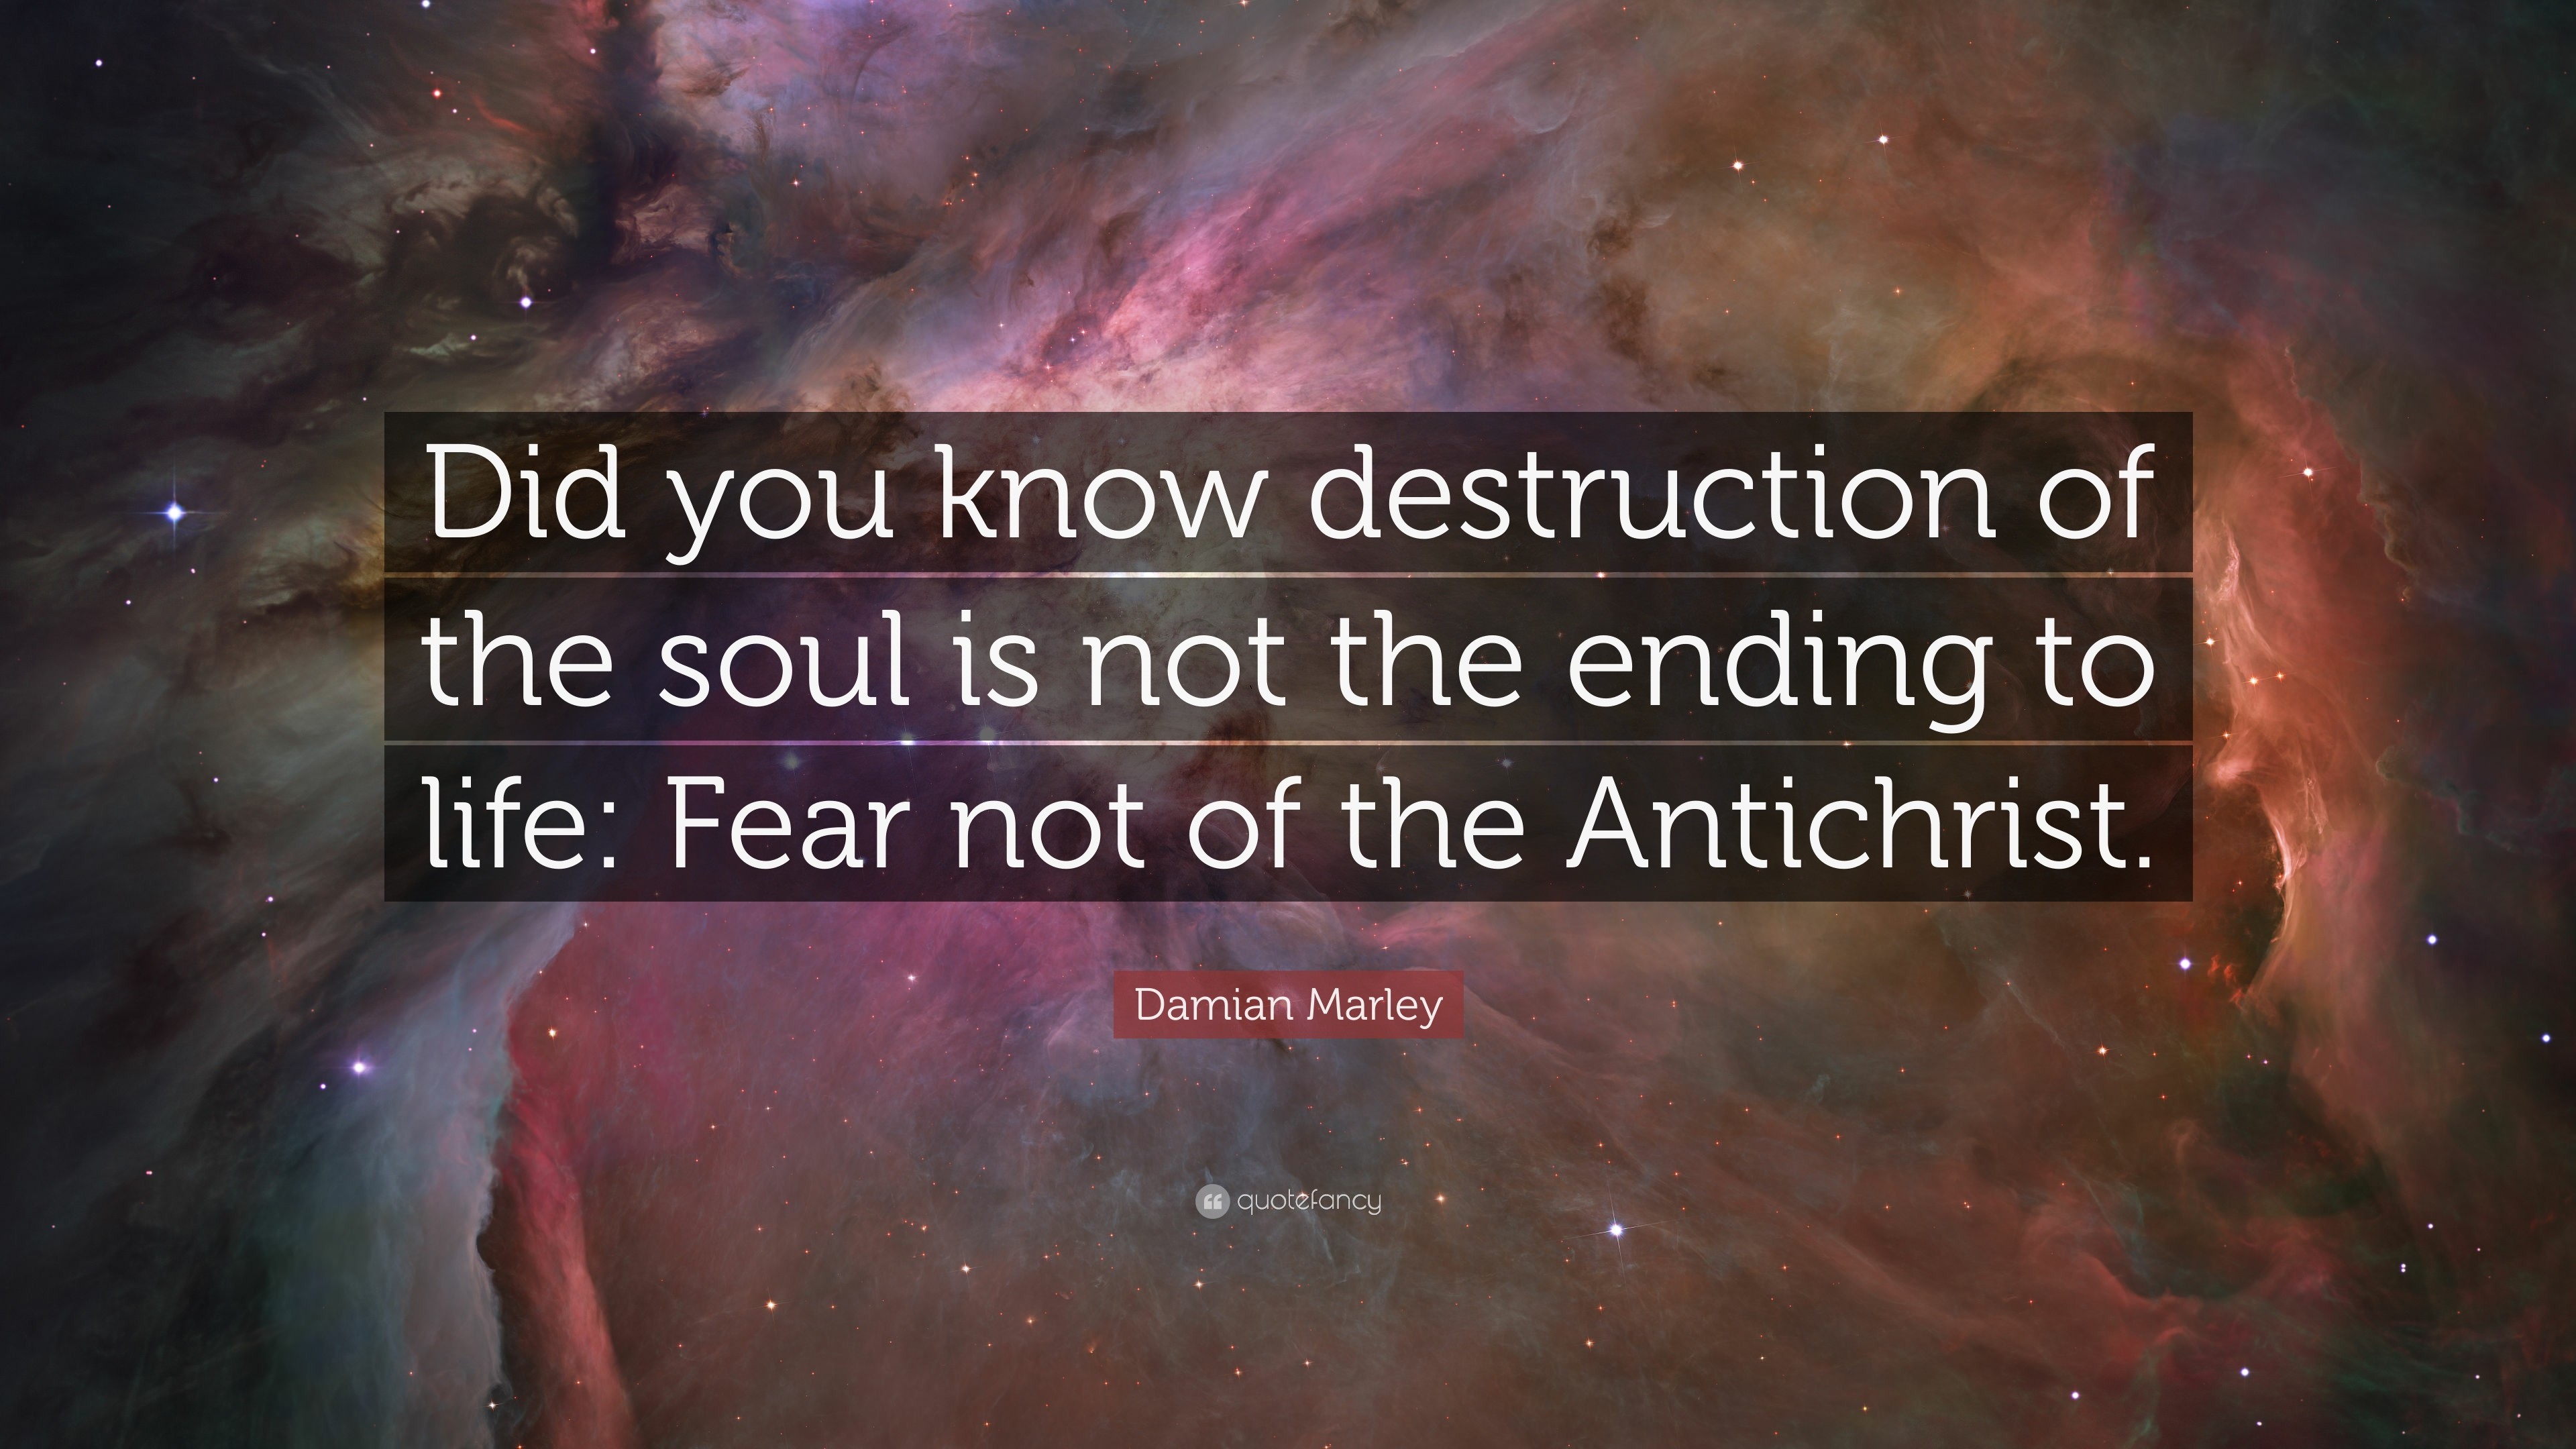 3840x2160 Damian Marley Quote: “Did you know destruction of the soul is not the ending